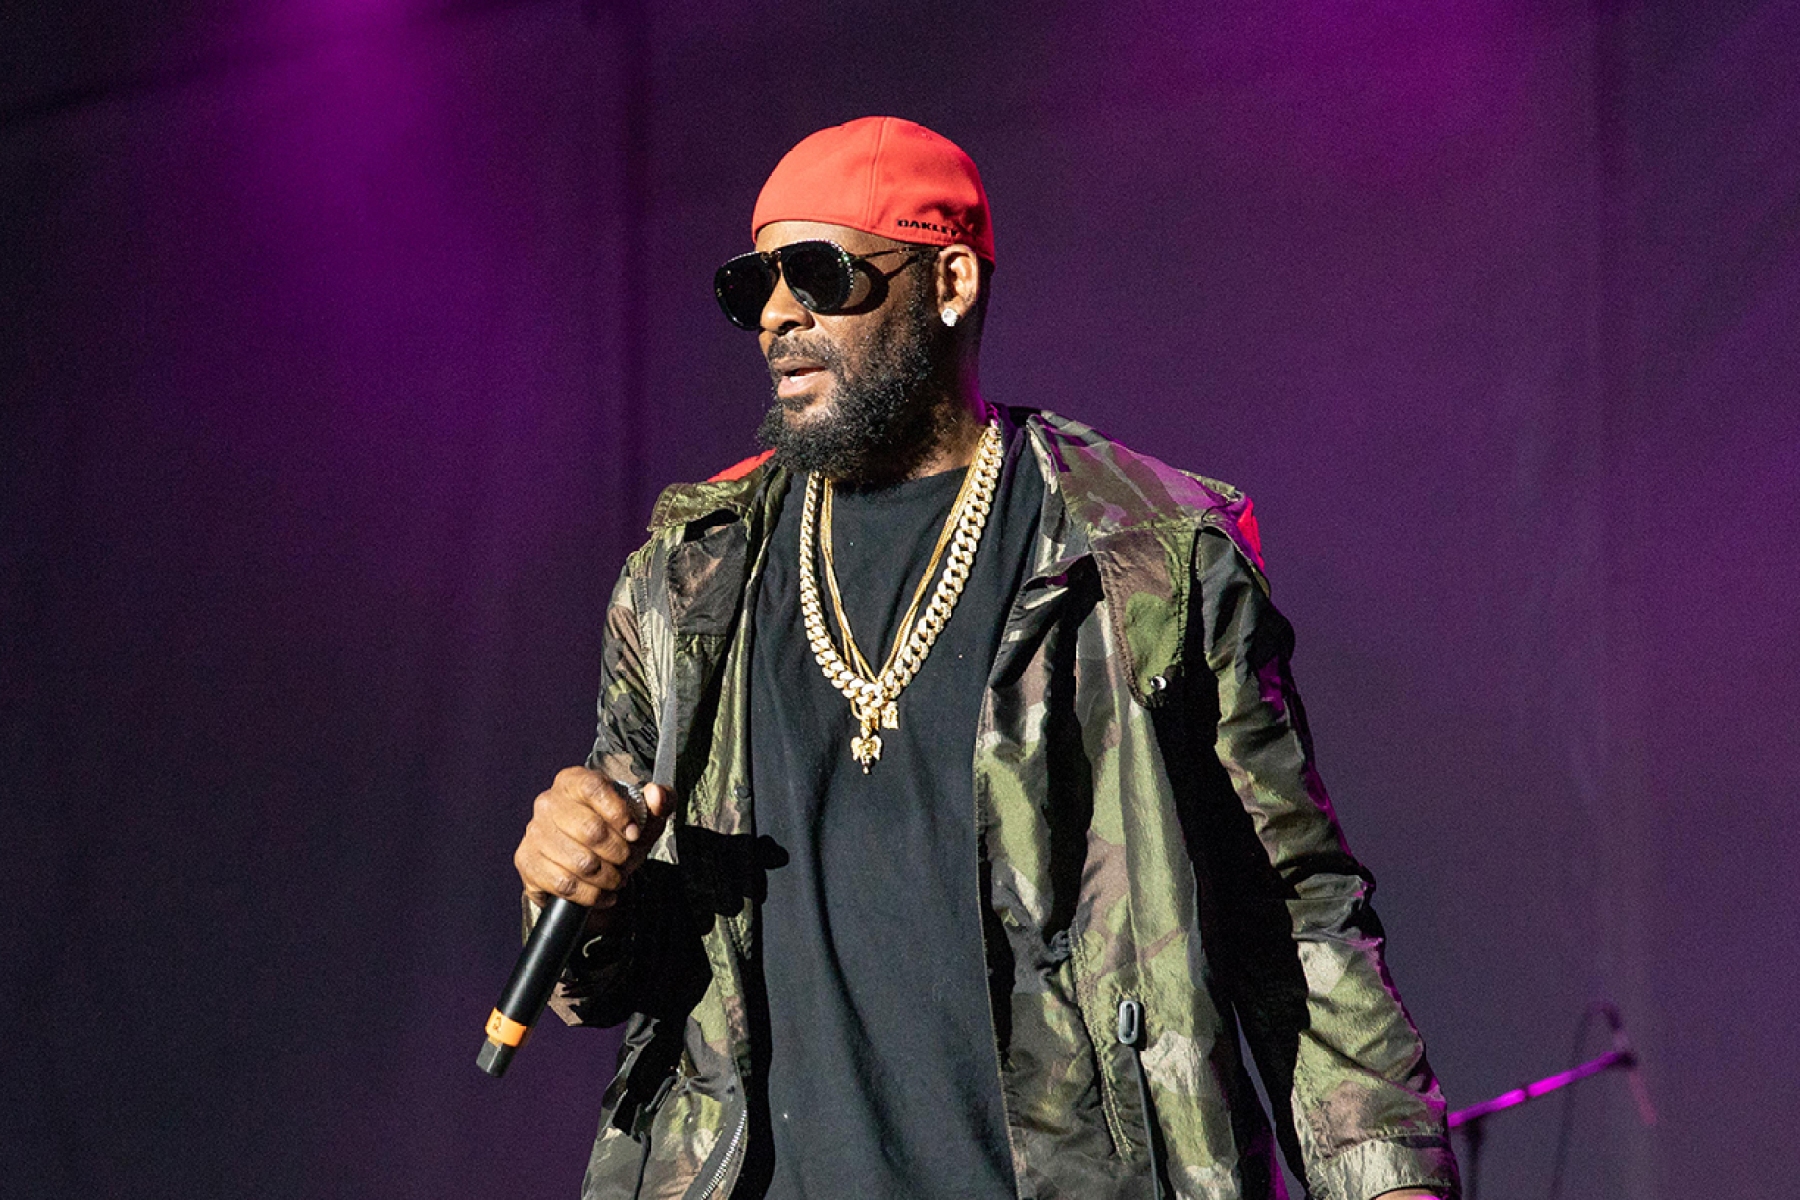 R Kelly’s Manager pleads guilty to Stalking Witness